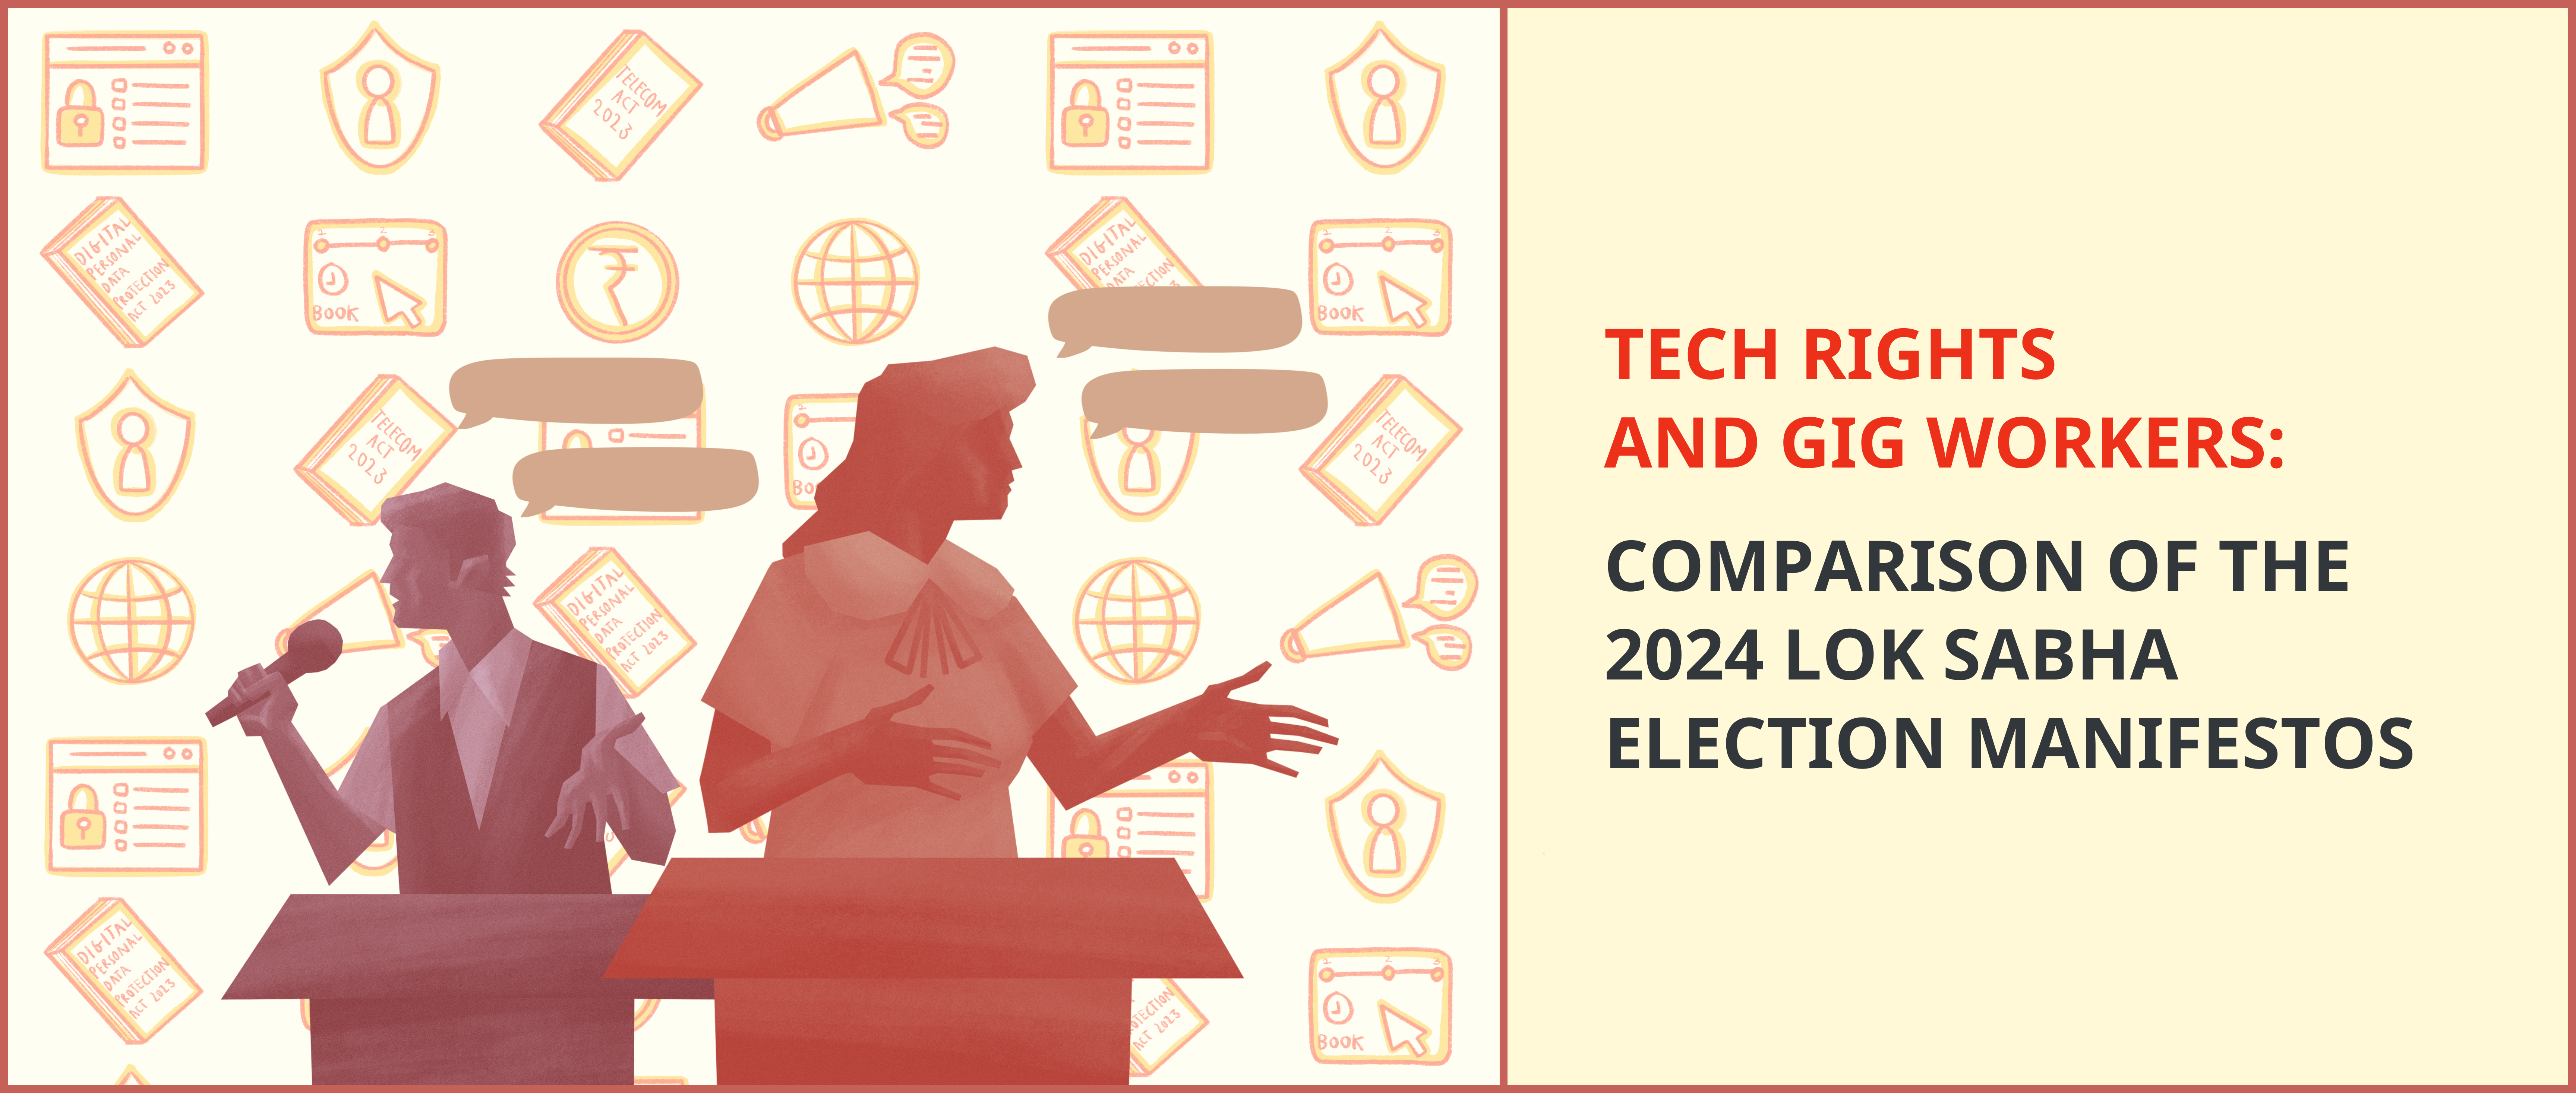 Comparing the 2024 Lok Sabha Election Manifestos from the perspective of Technology Rights and Gig Workers